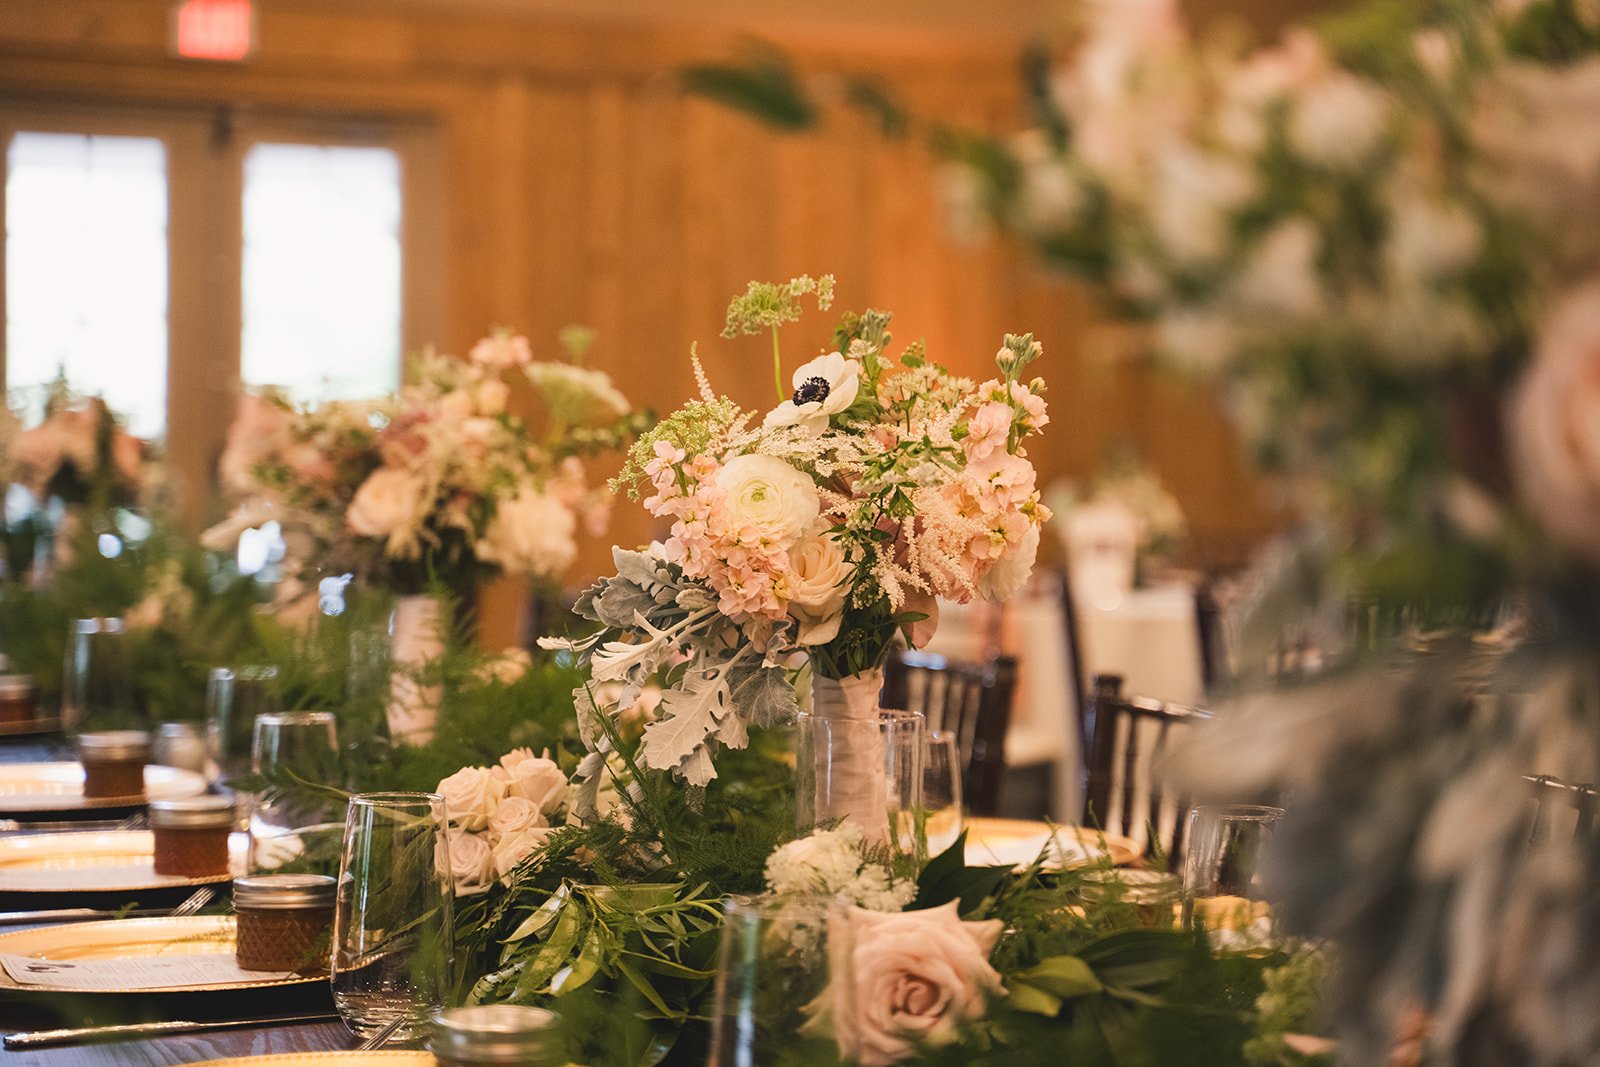 Bridesmaids' bouquets are so pretty - why not reuse them as reception decorations? Not only is it a way to save a little money, it's also great for the environment. 

Photo/Video @bahia_films @naomi_jemison
Planning @southerncharmevents
Catering @pas